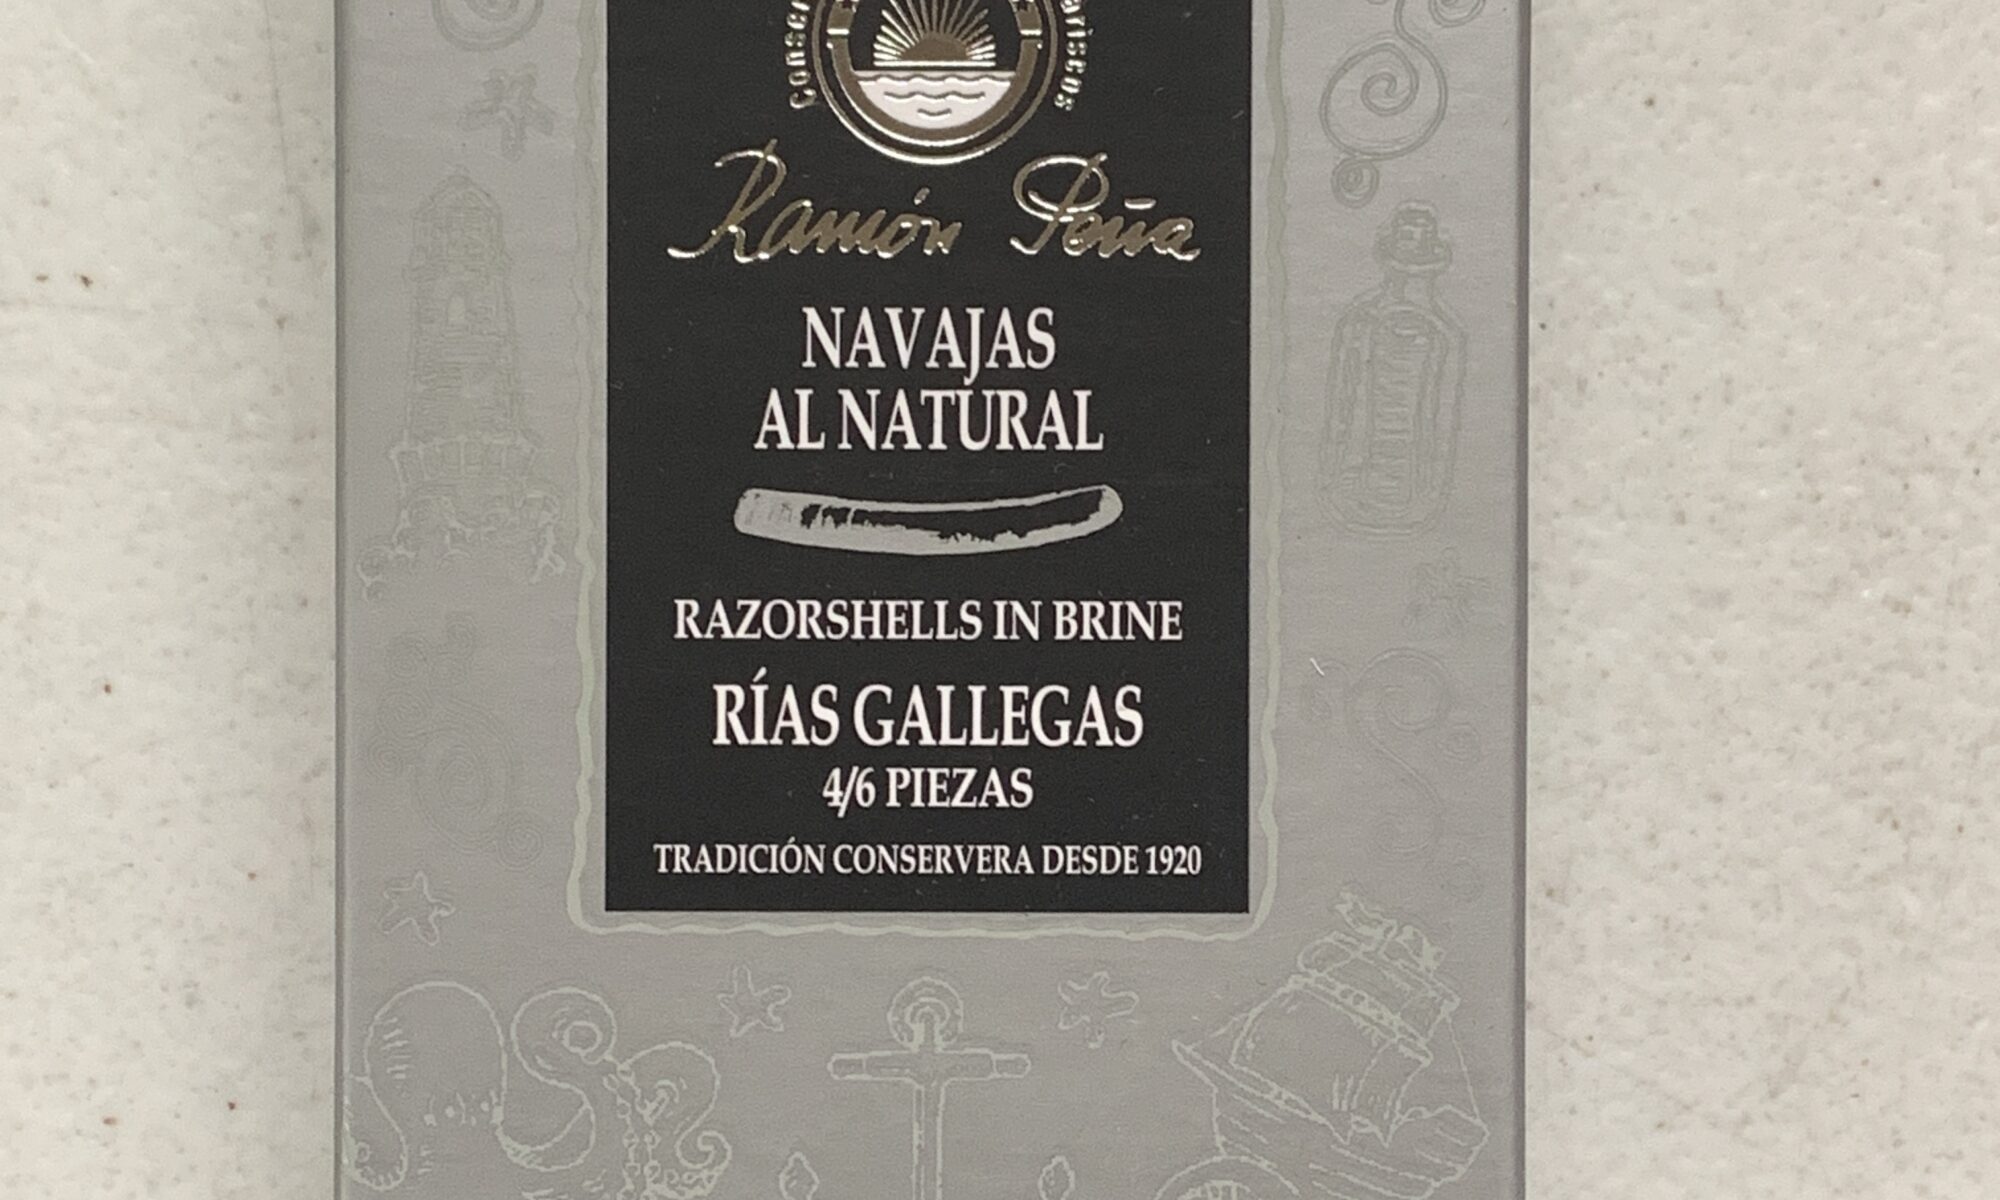 Image of the front of a package of Ramón Peña Razorshells (Navajas) in Brine 4/6, Silver Line